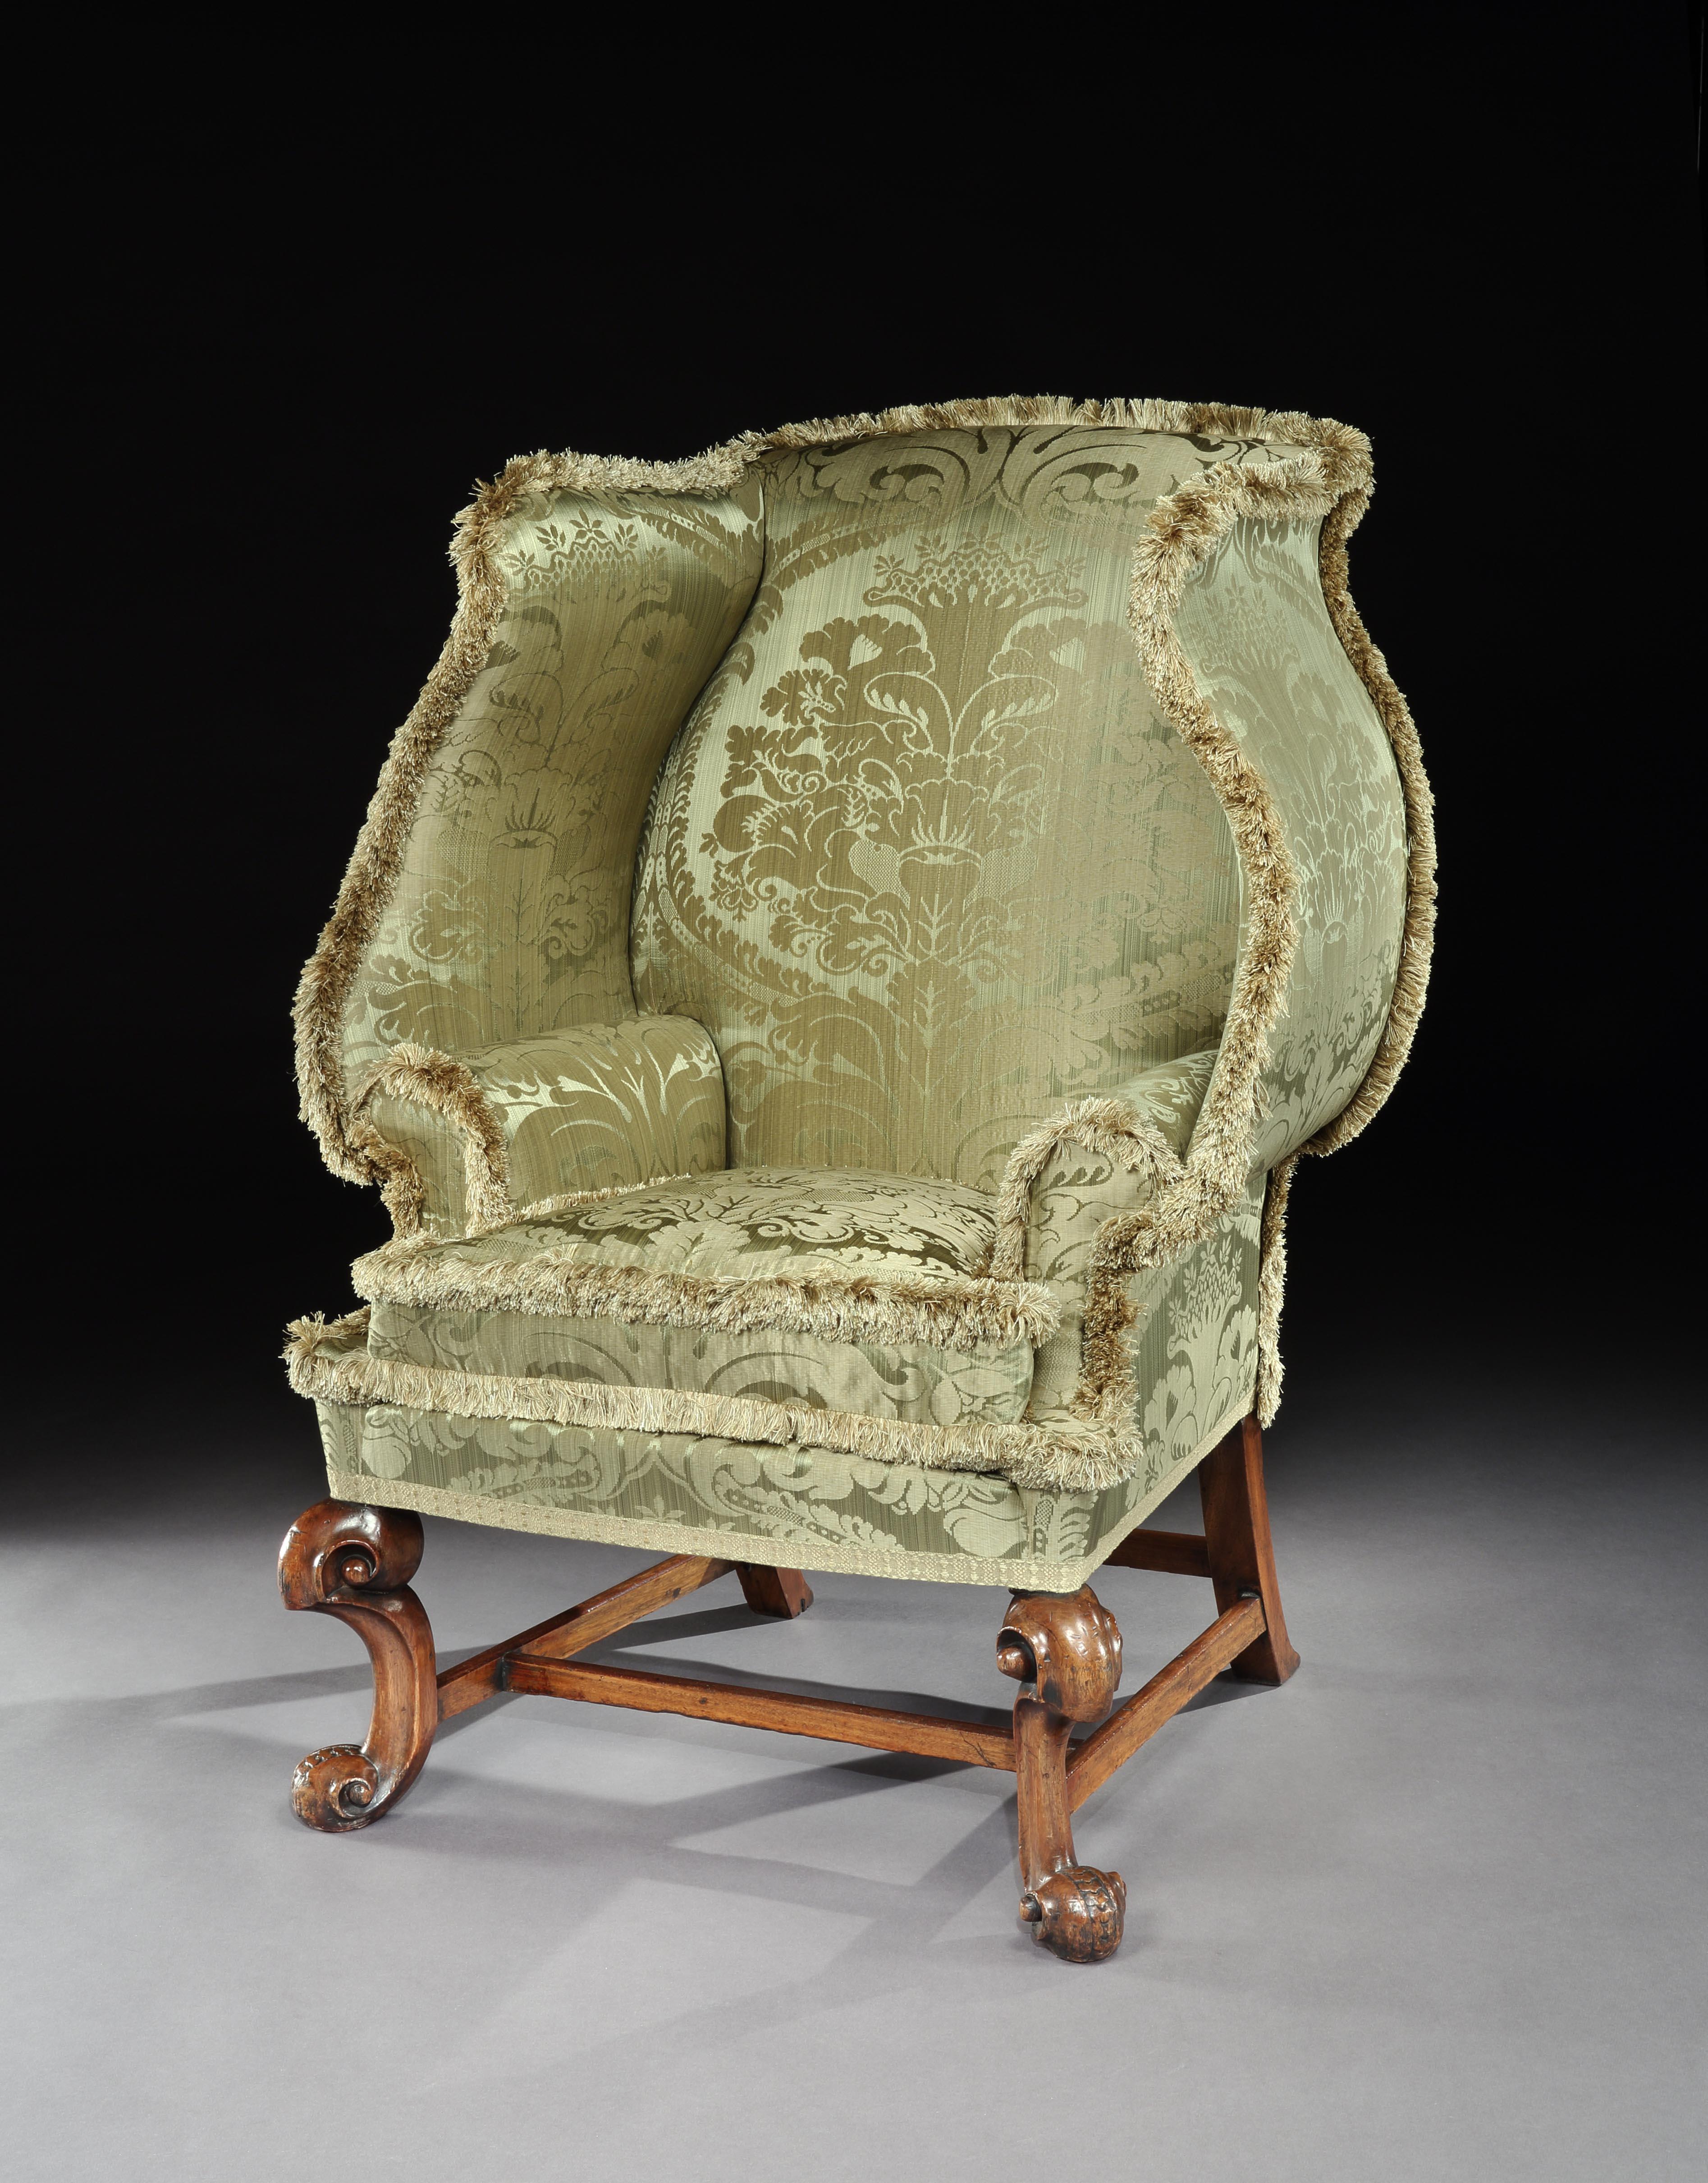 An exceptionally, rare 18th century, upholstered wing armchair with a scalloped back from Notley Priory & the collection of Vivien Leigh & Laurence Oliver by descent

- Acquired with a rare, shell back wing armchair from the Estate of Vivien